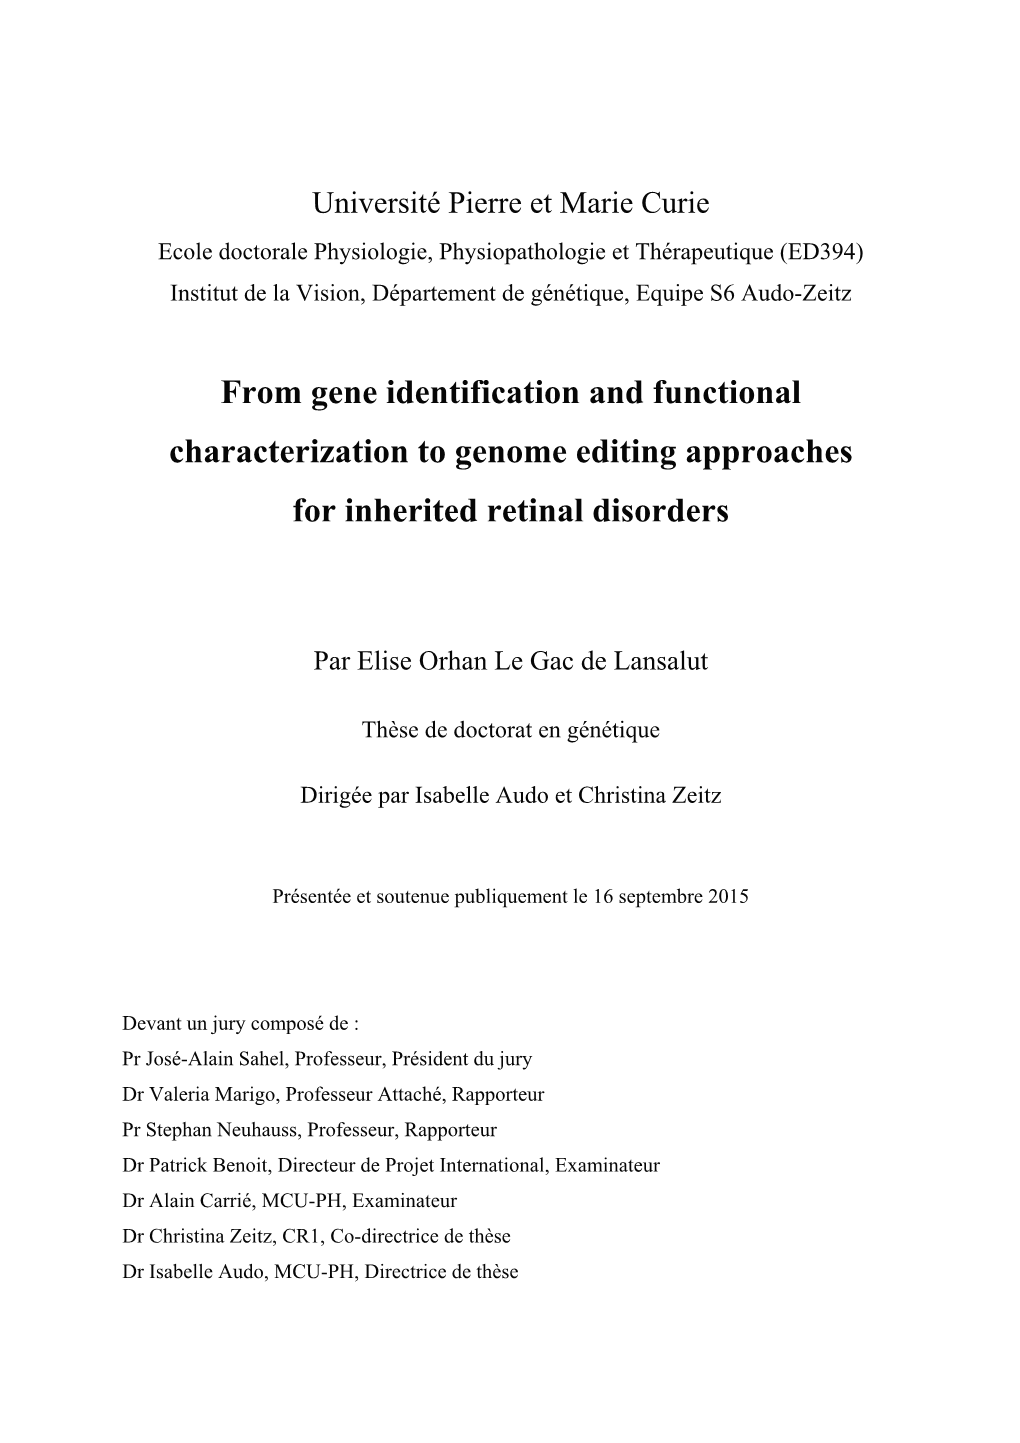 From Gene Identification and Functional Characterization to Genome Editing Approaches for Inherited Retinal Disorders